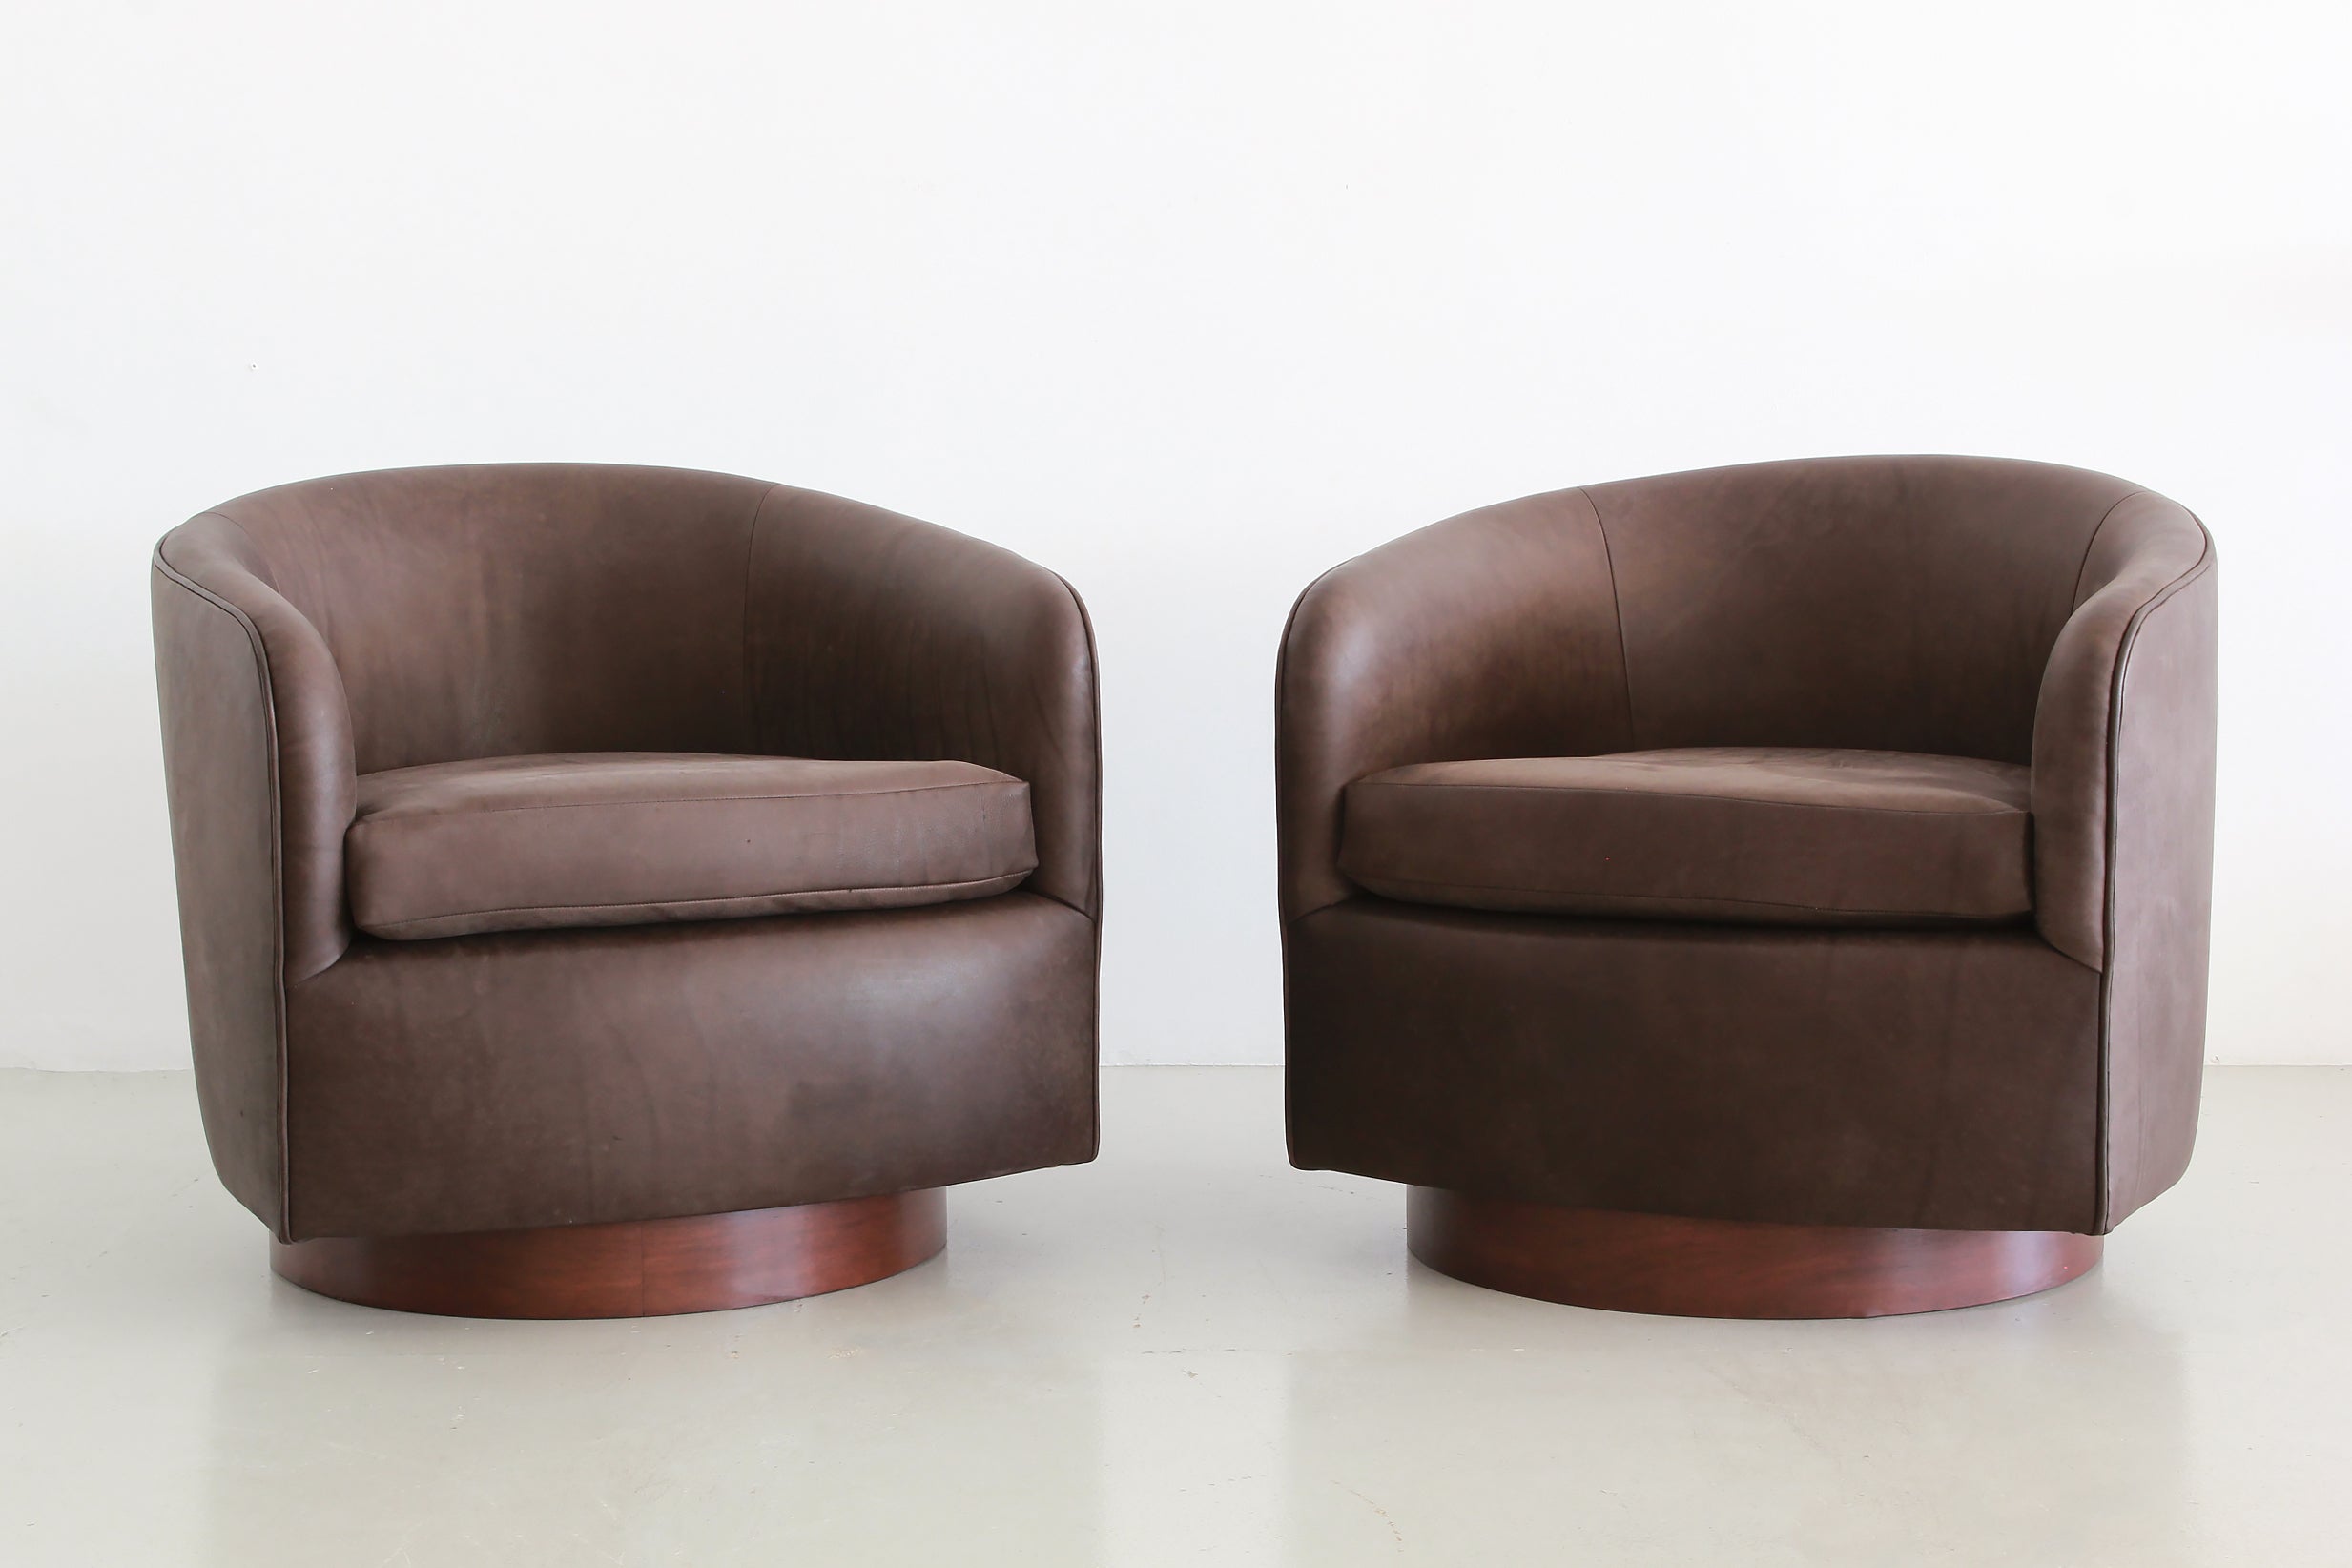 Chocolate Leather Swivel Chairs In The Style Of Milo Baughman